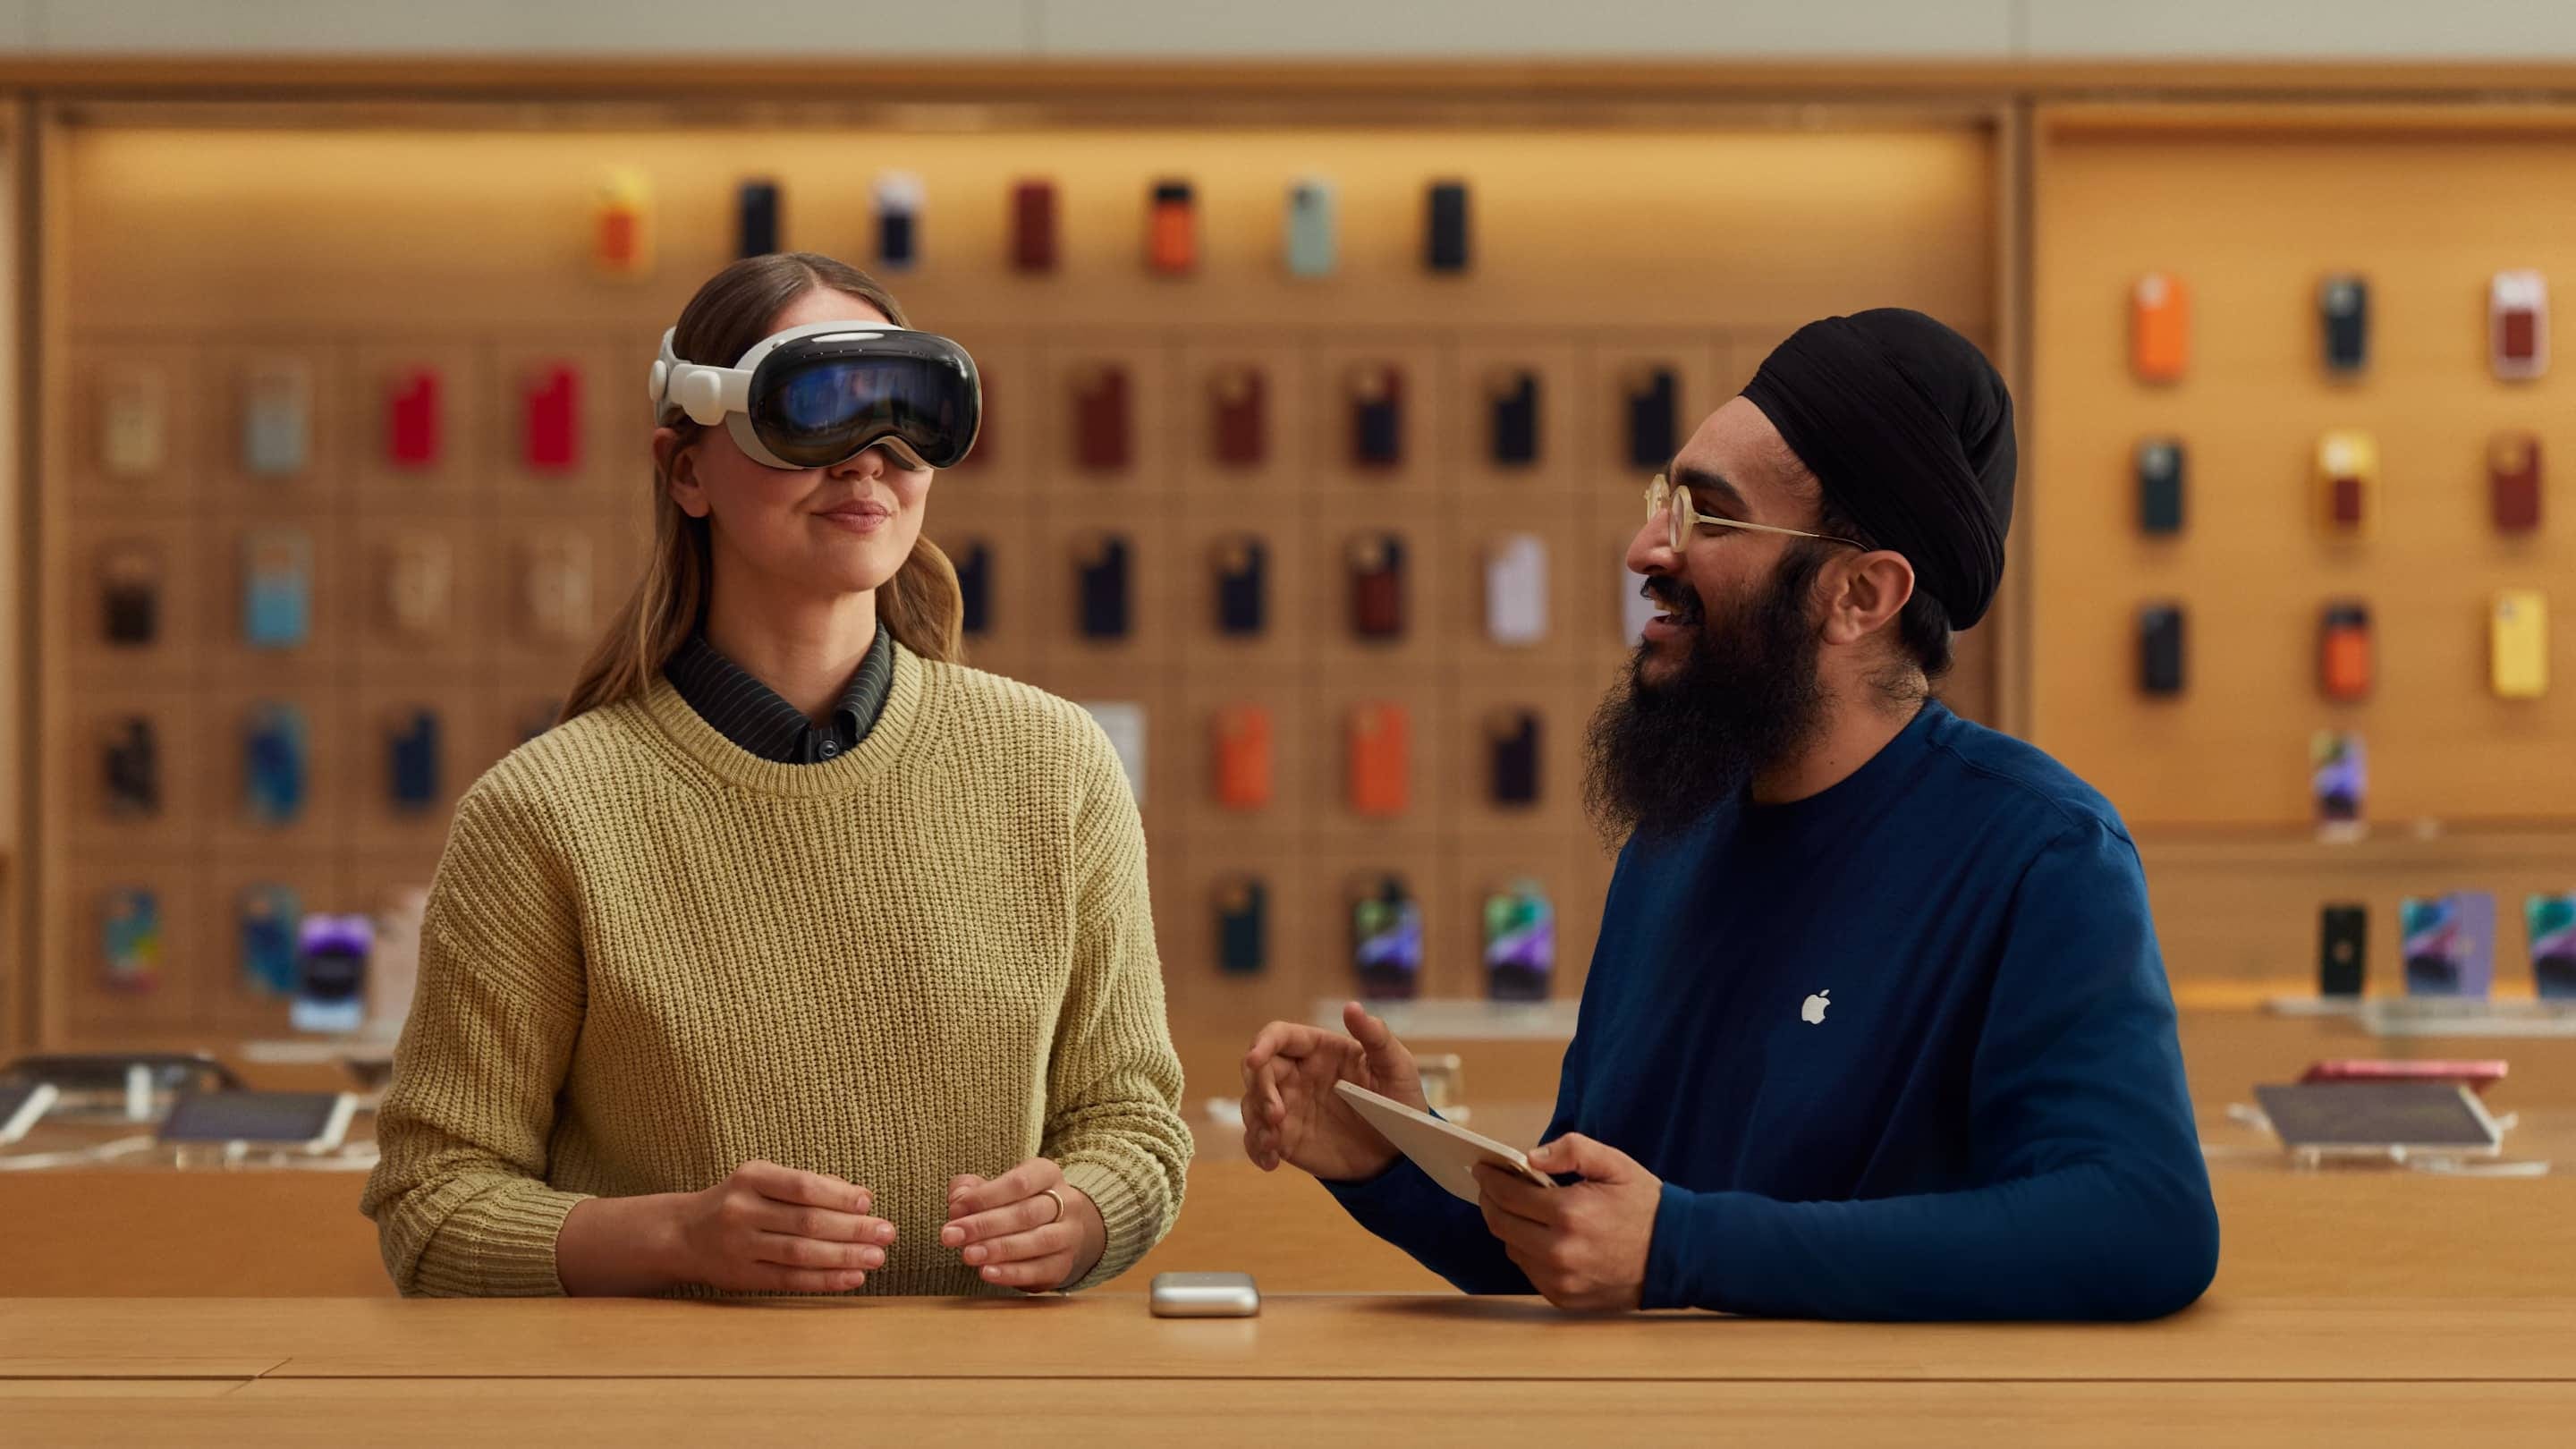 Vision Pro Demos at Apple Stores in UK, Canada, and More Begin July 12